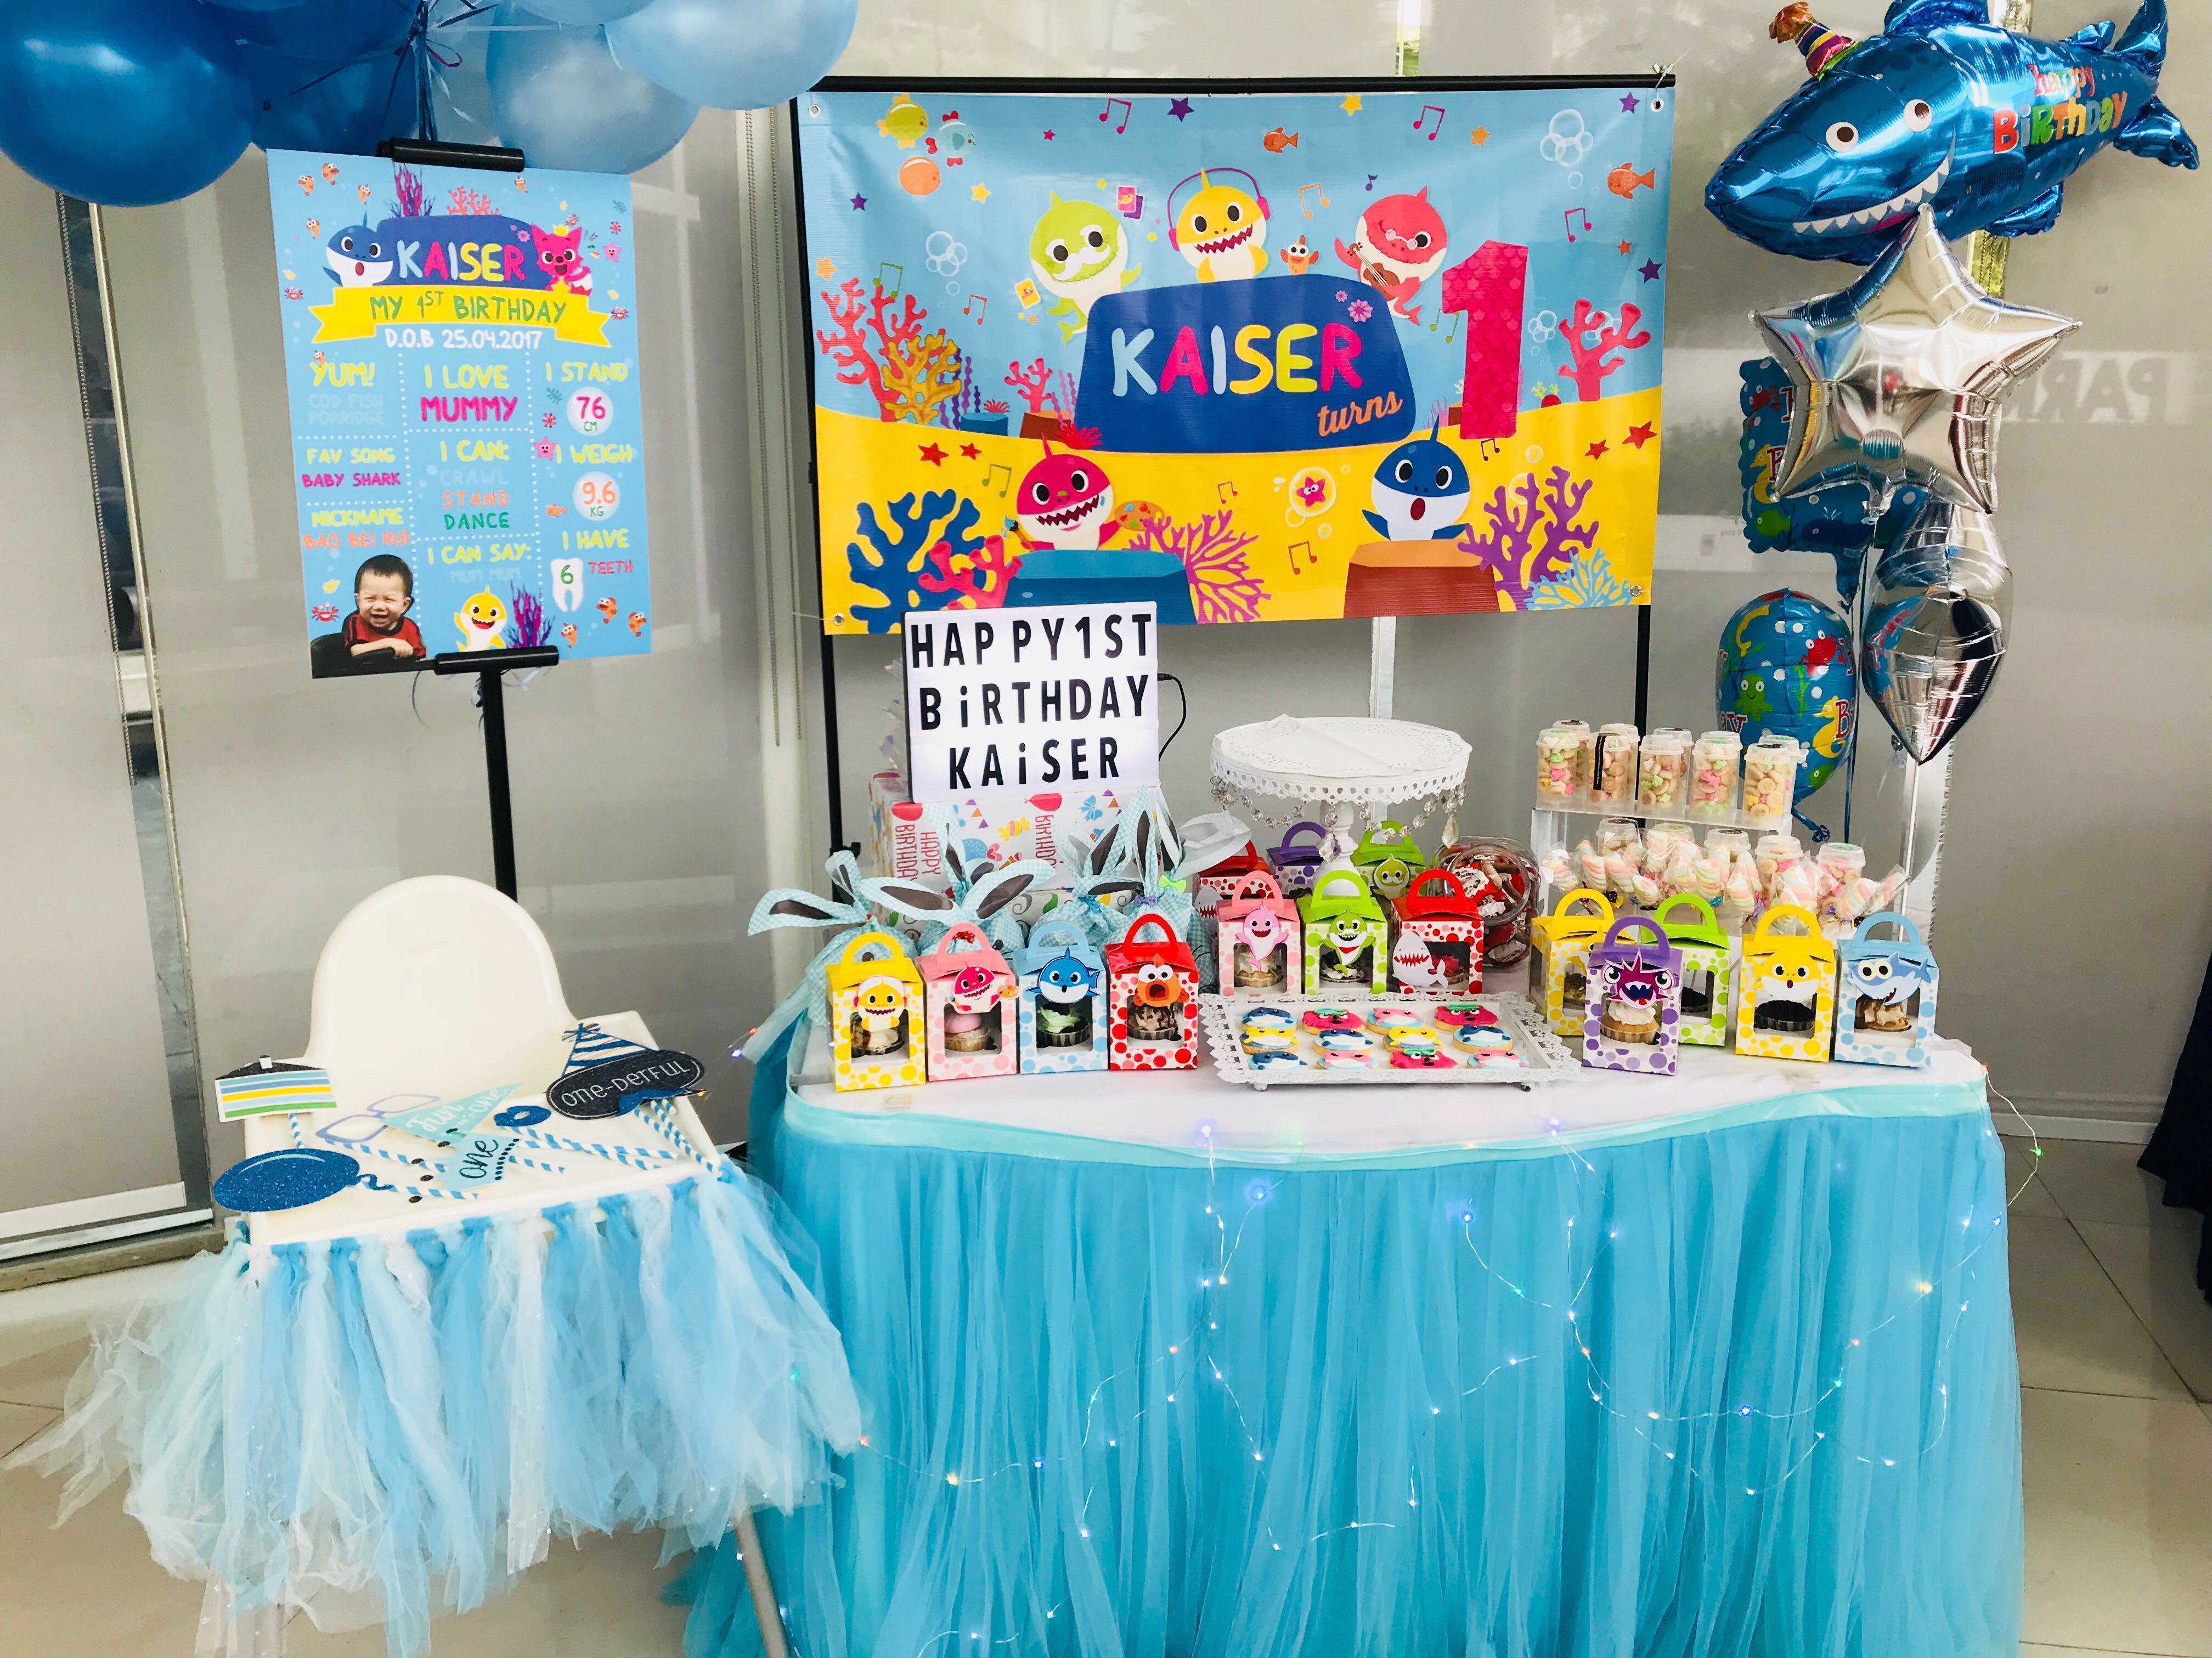 https://media.karousell.com/media/photos/products/2018/06/22/dessert_table__baby_shark_theme_or_others_1529625377_8af75824.jpg